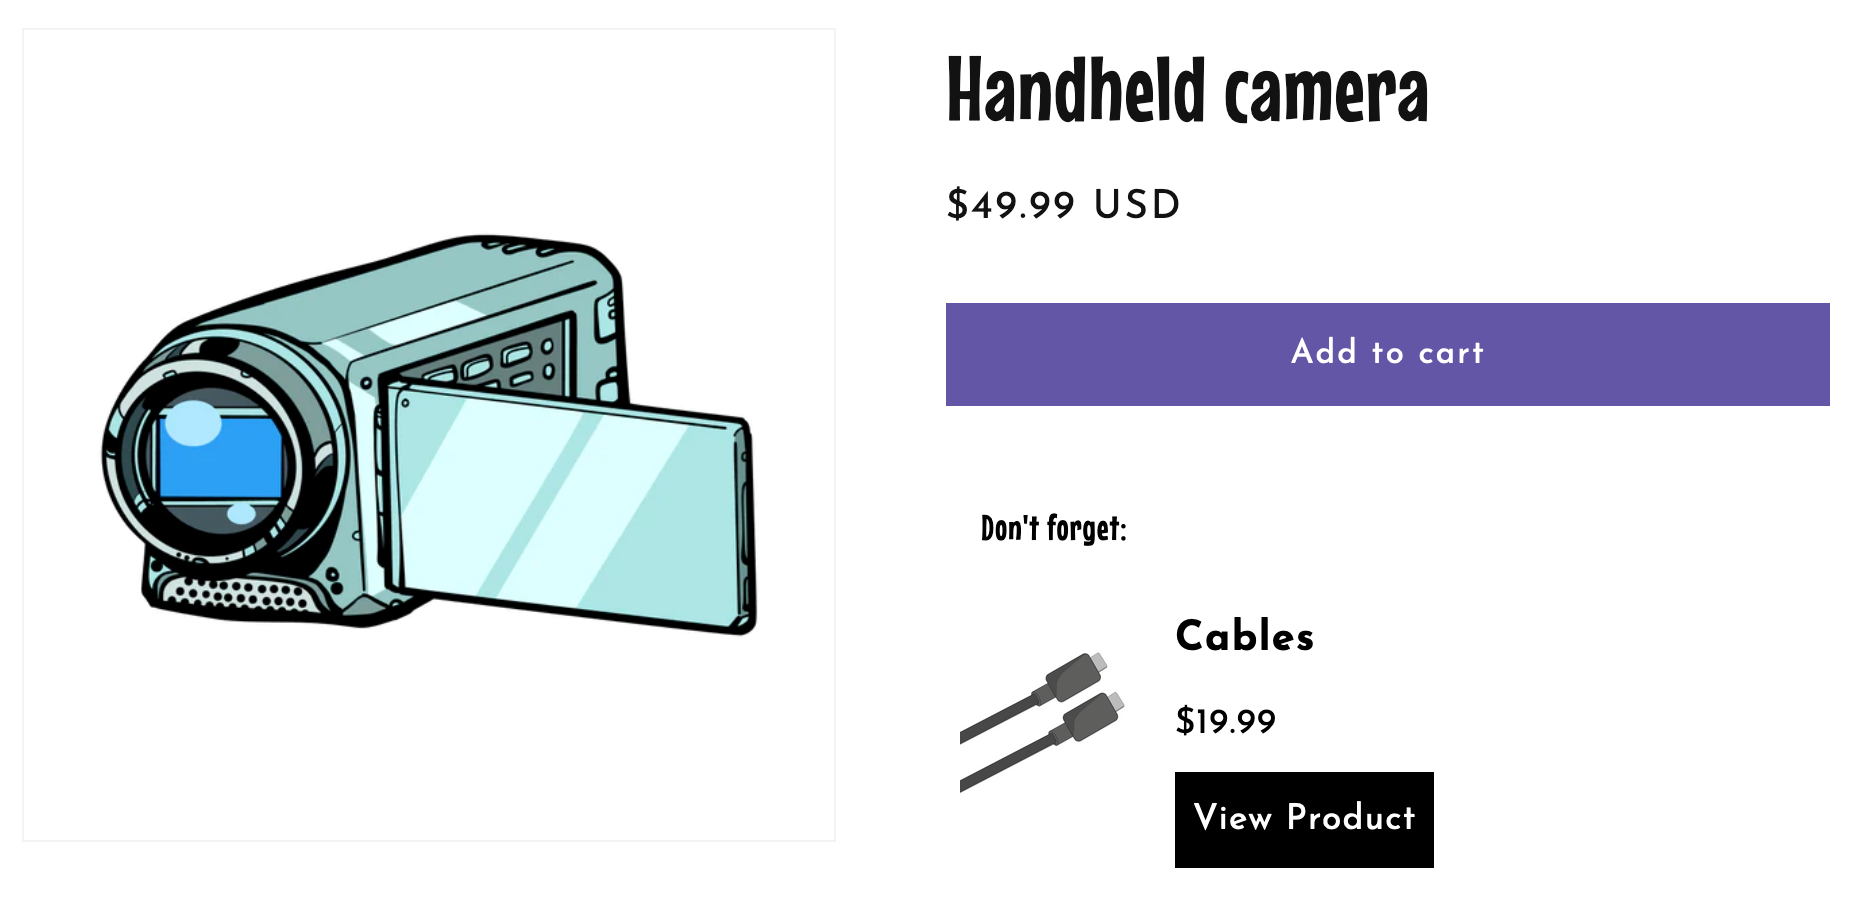 Example of recommending cables with a handheld camera with Linking Llama.